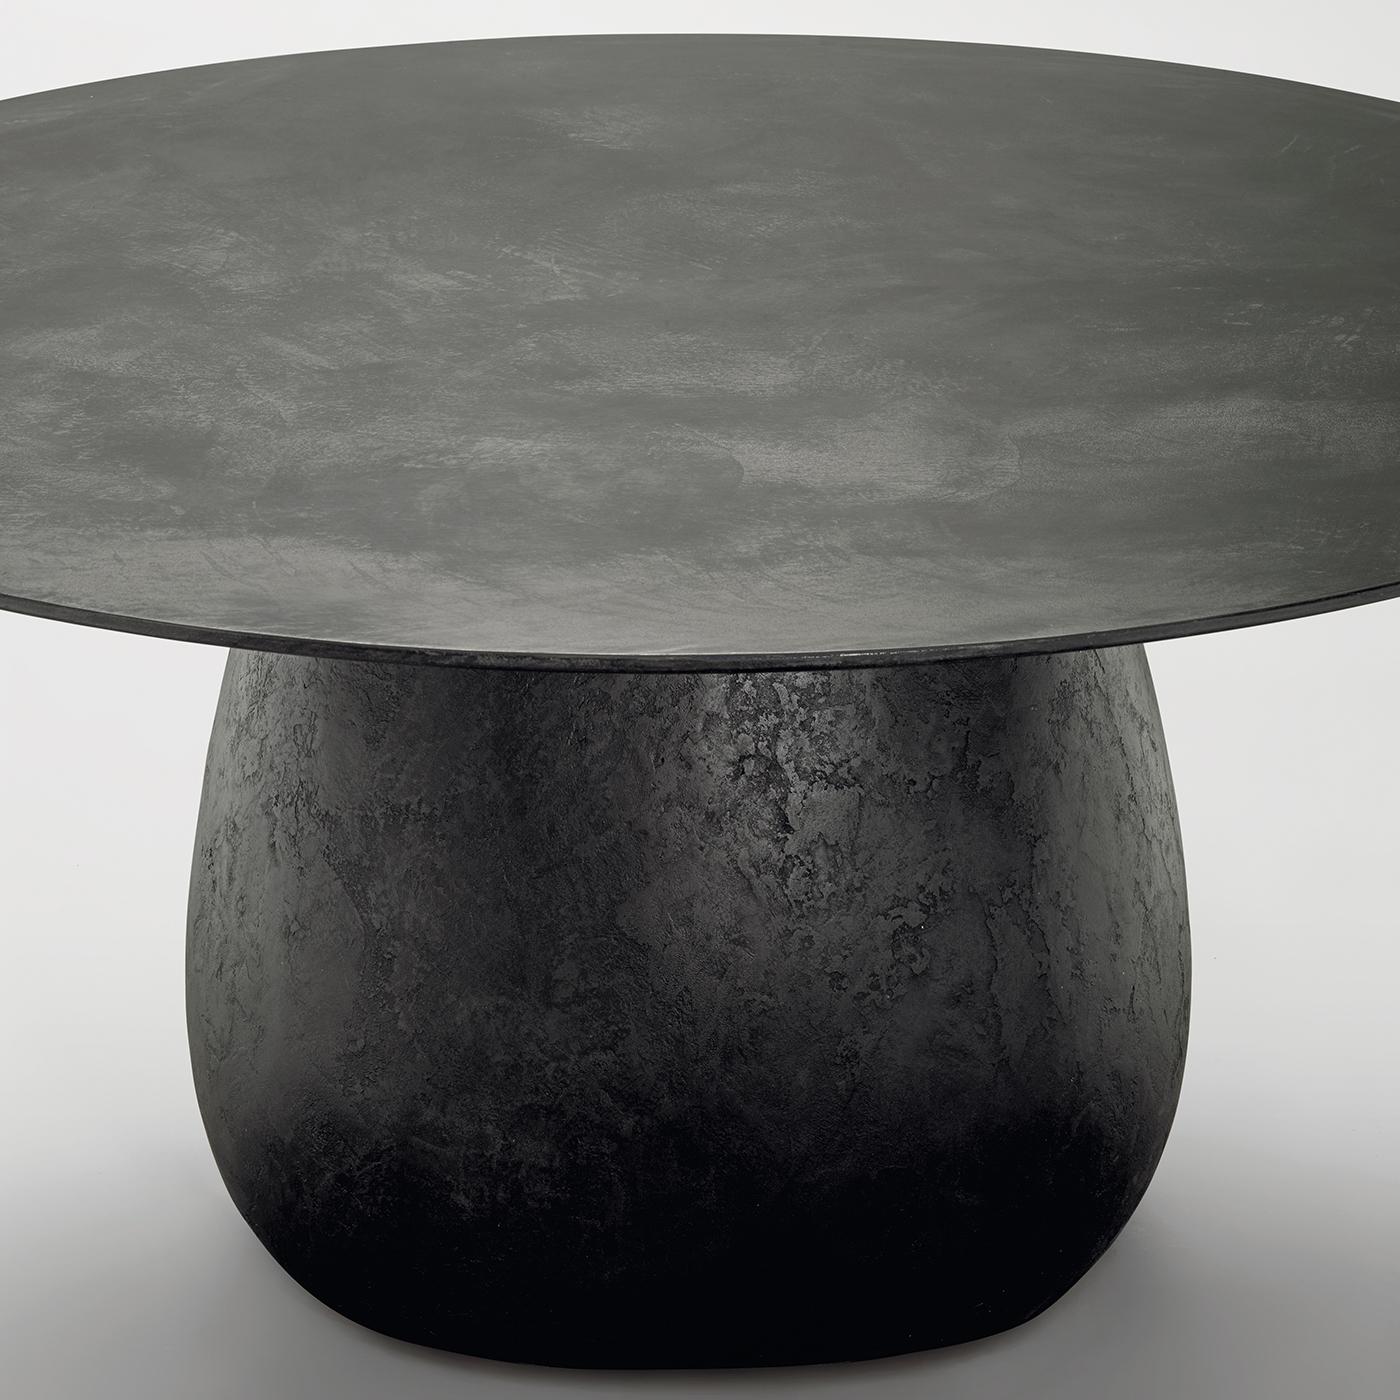 Bold and sophisticated, this dining table boasts a sculptural silhouette featuring two elements: a sturdy base composed of a steel leg surrounded by rigid polyurethane, and a circular top made of purenit, a new high-density smart material, covered